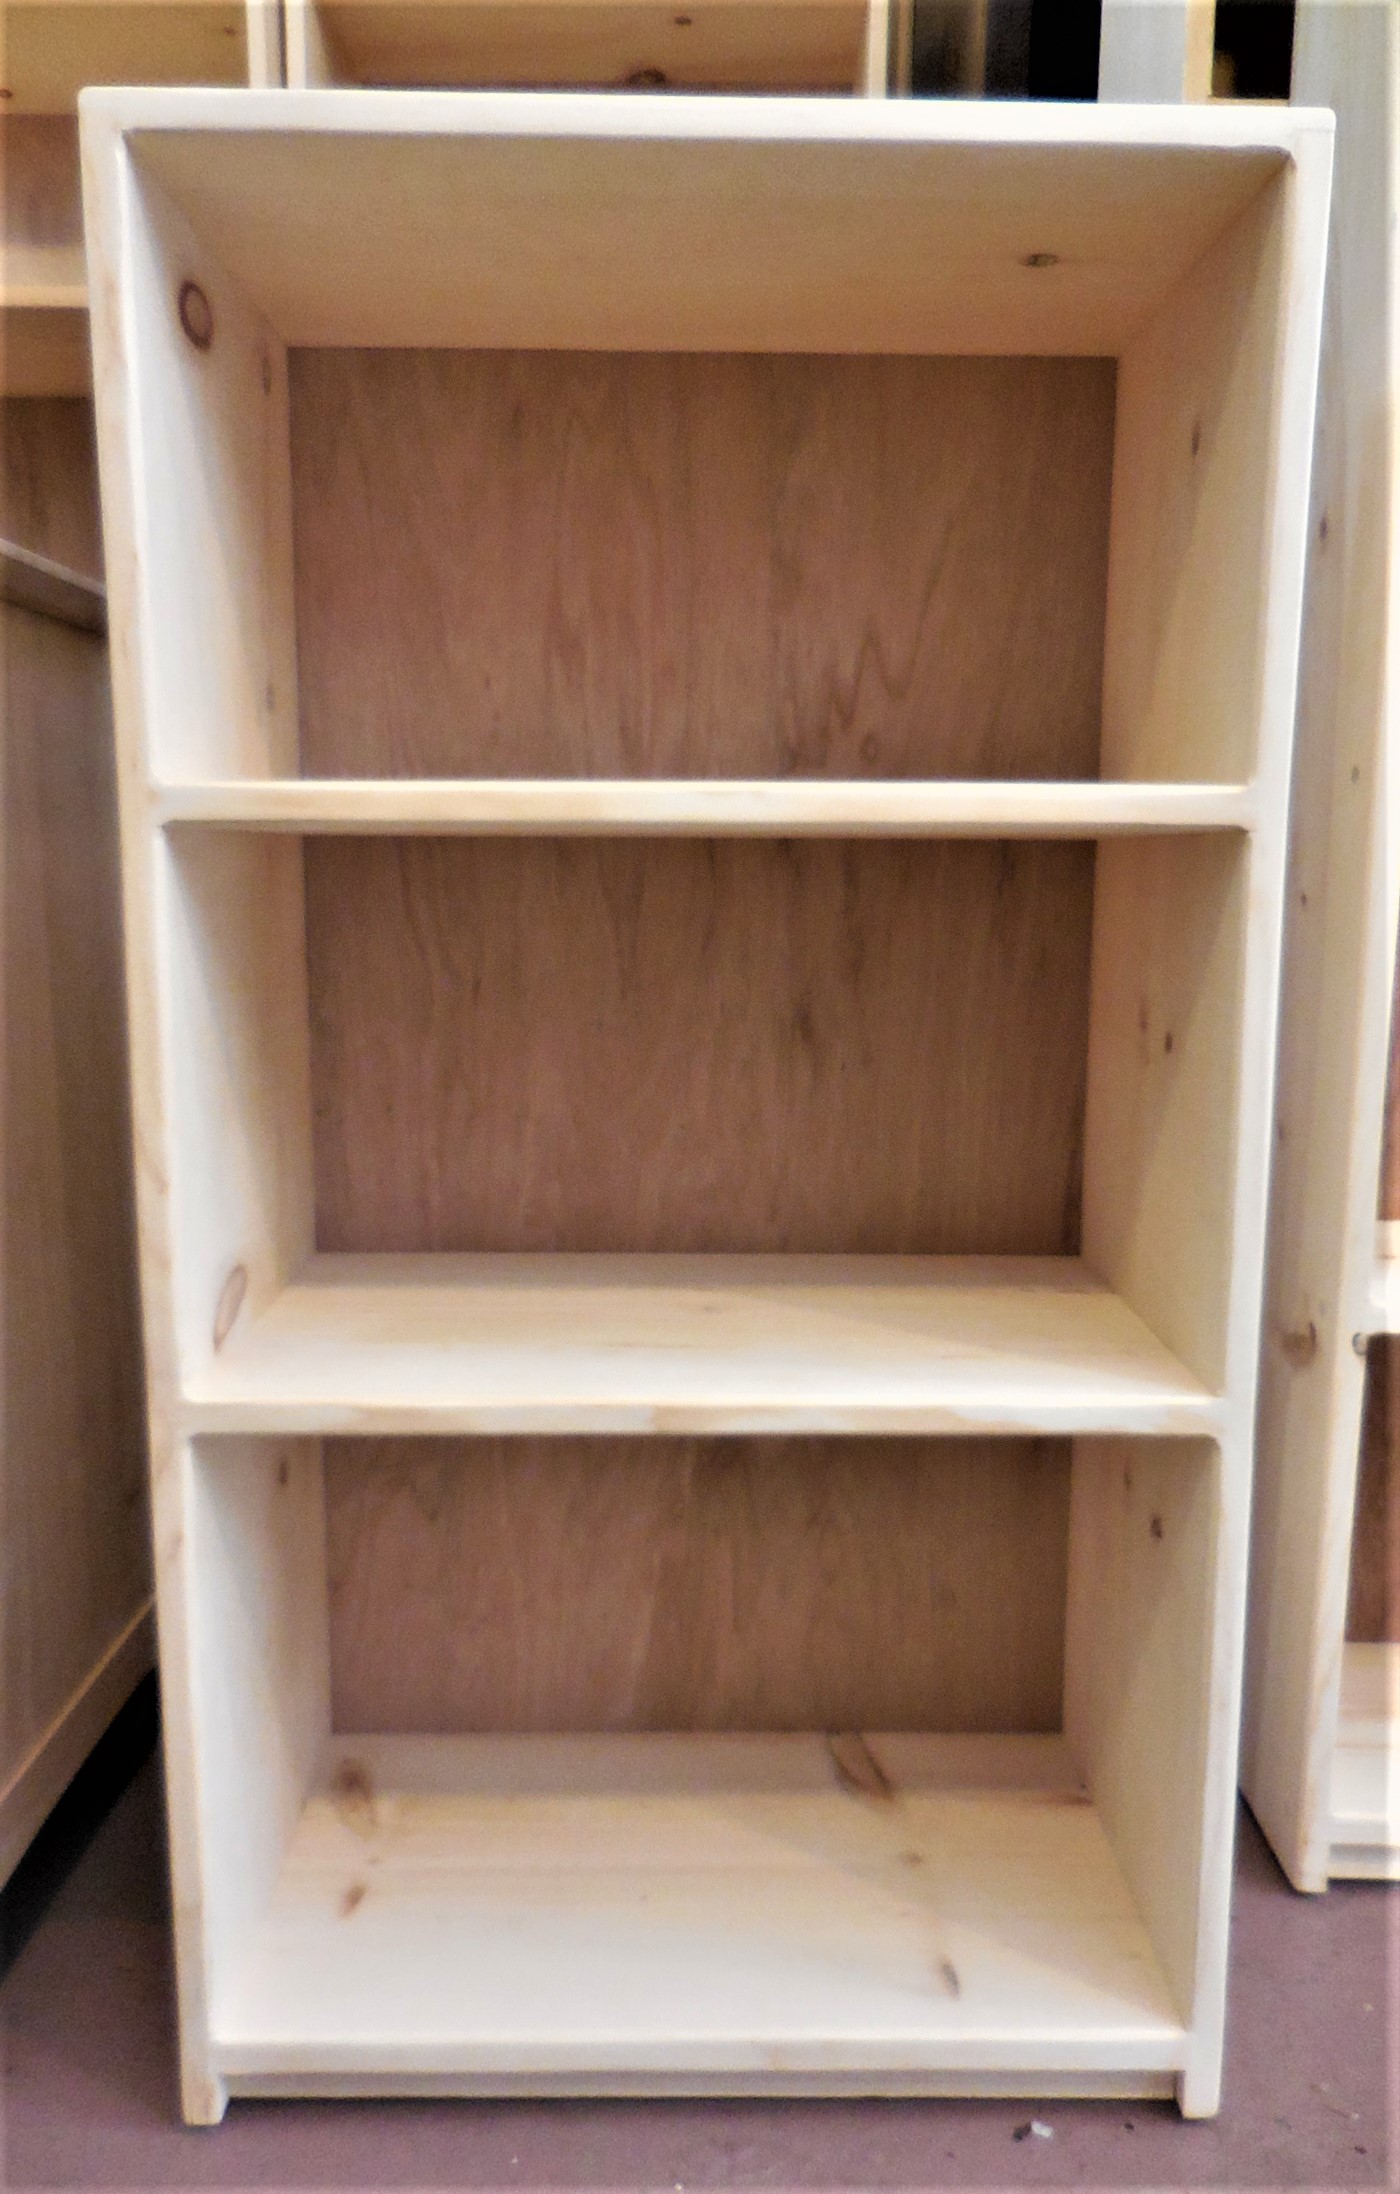 Bookcase For $10 In San Francisco, CA